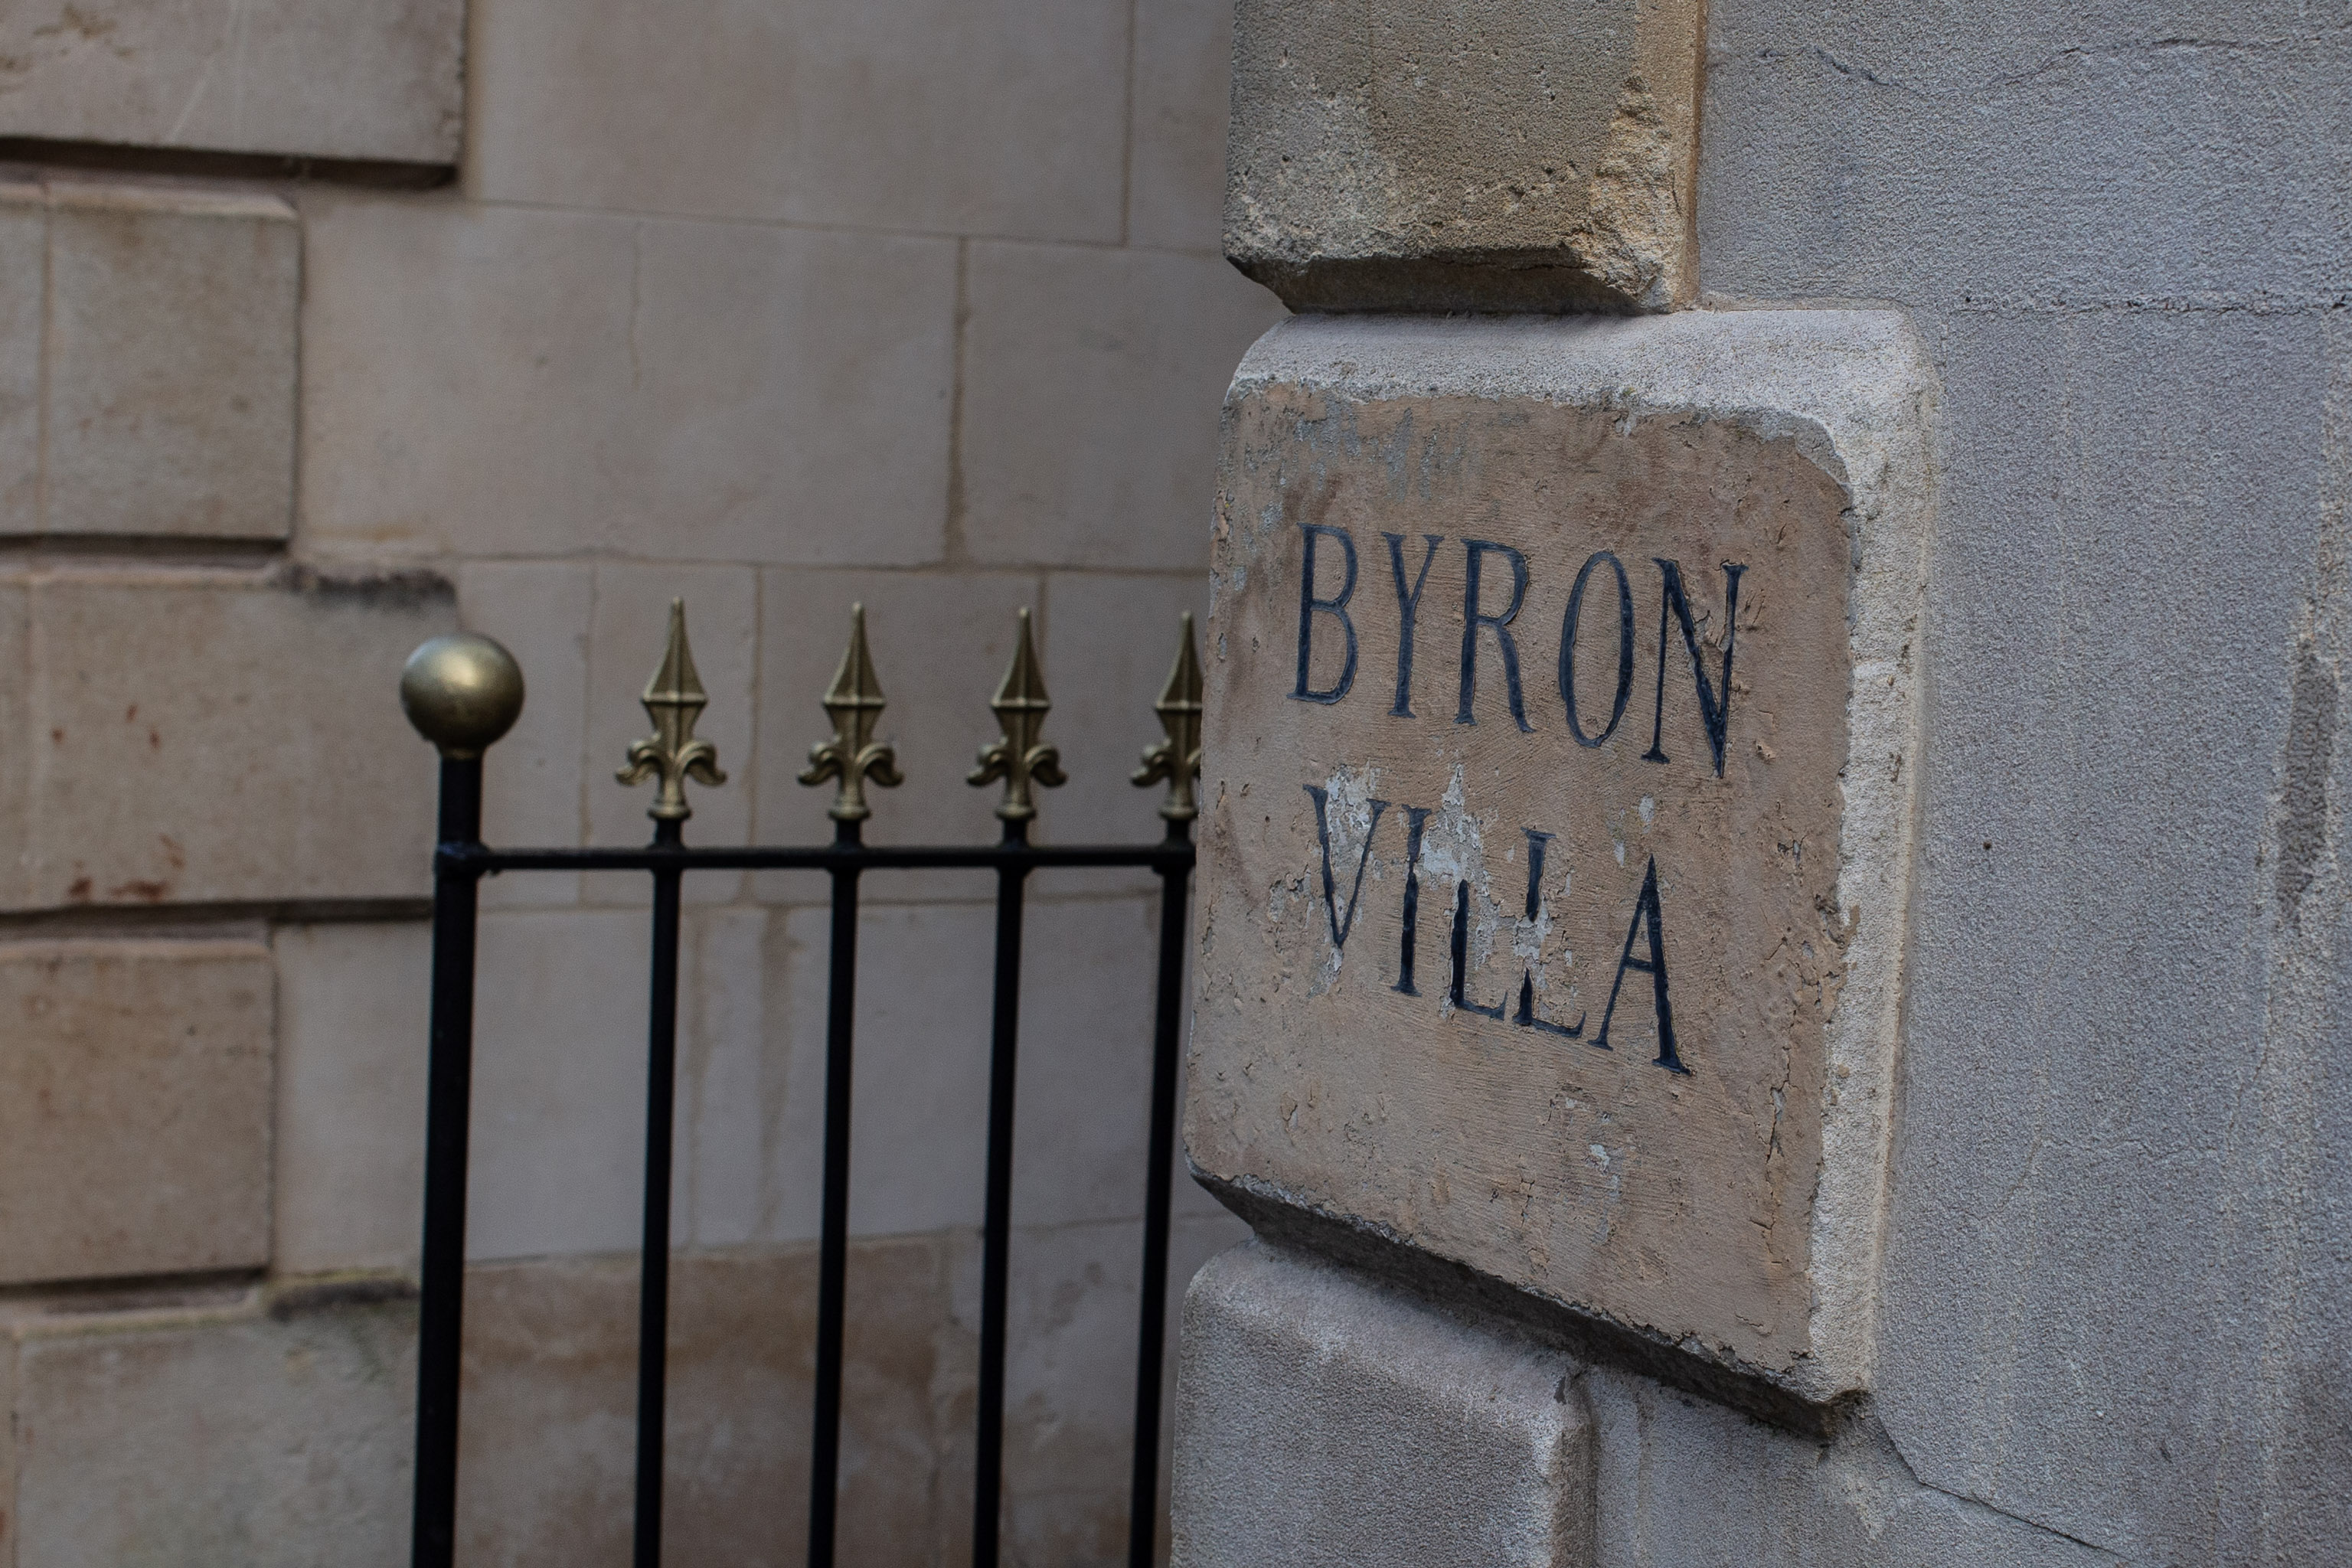 Byron Villa
Byron has a few things named after him around here. Not sure of all his connections to the area, but I know Lady Byron bought Red Lodge—currently a...